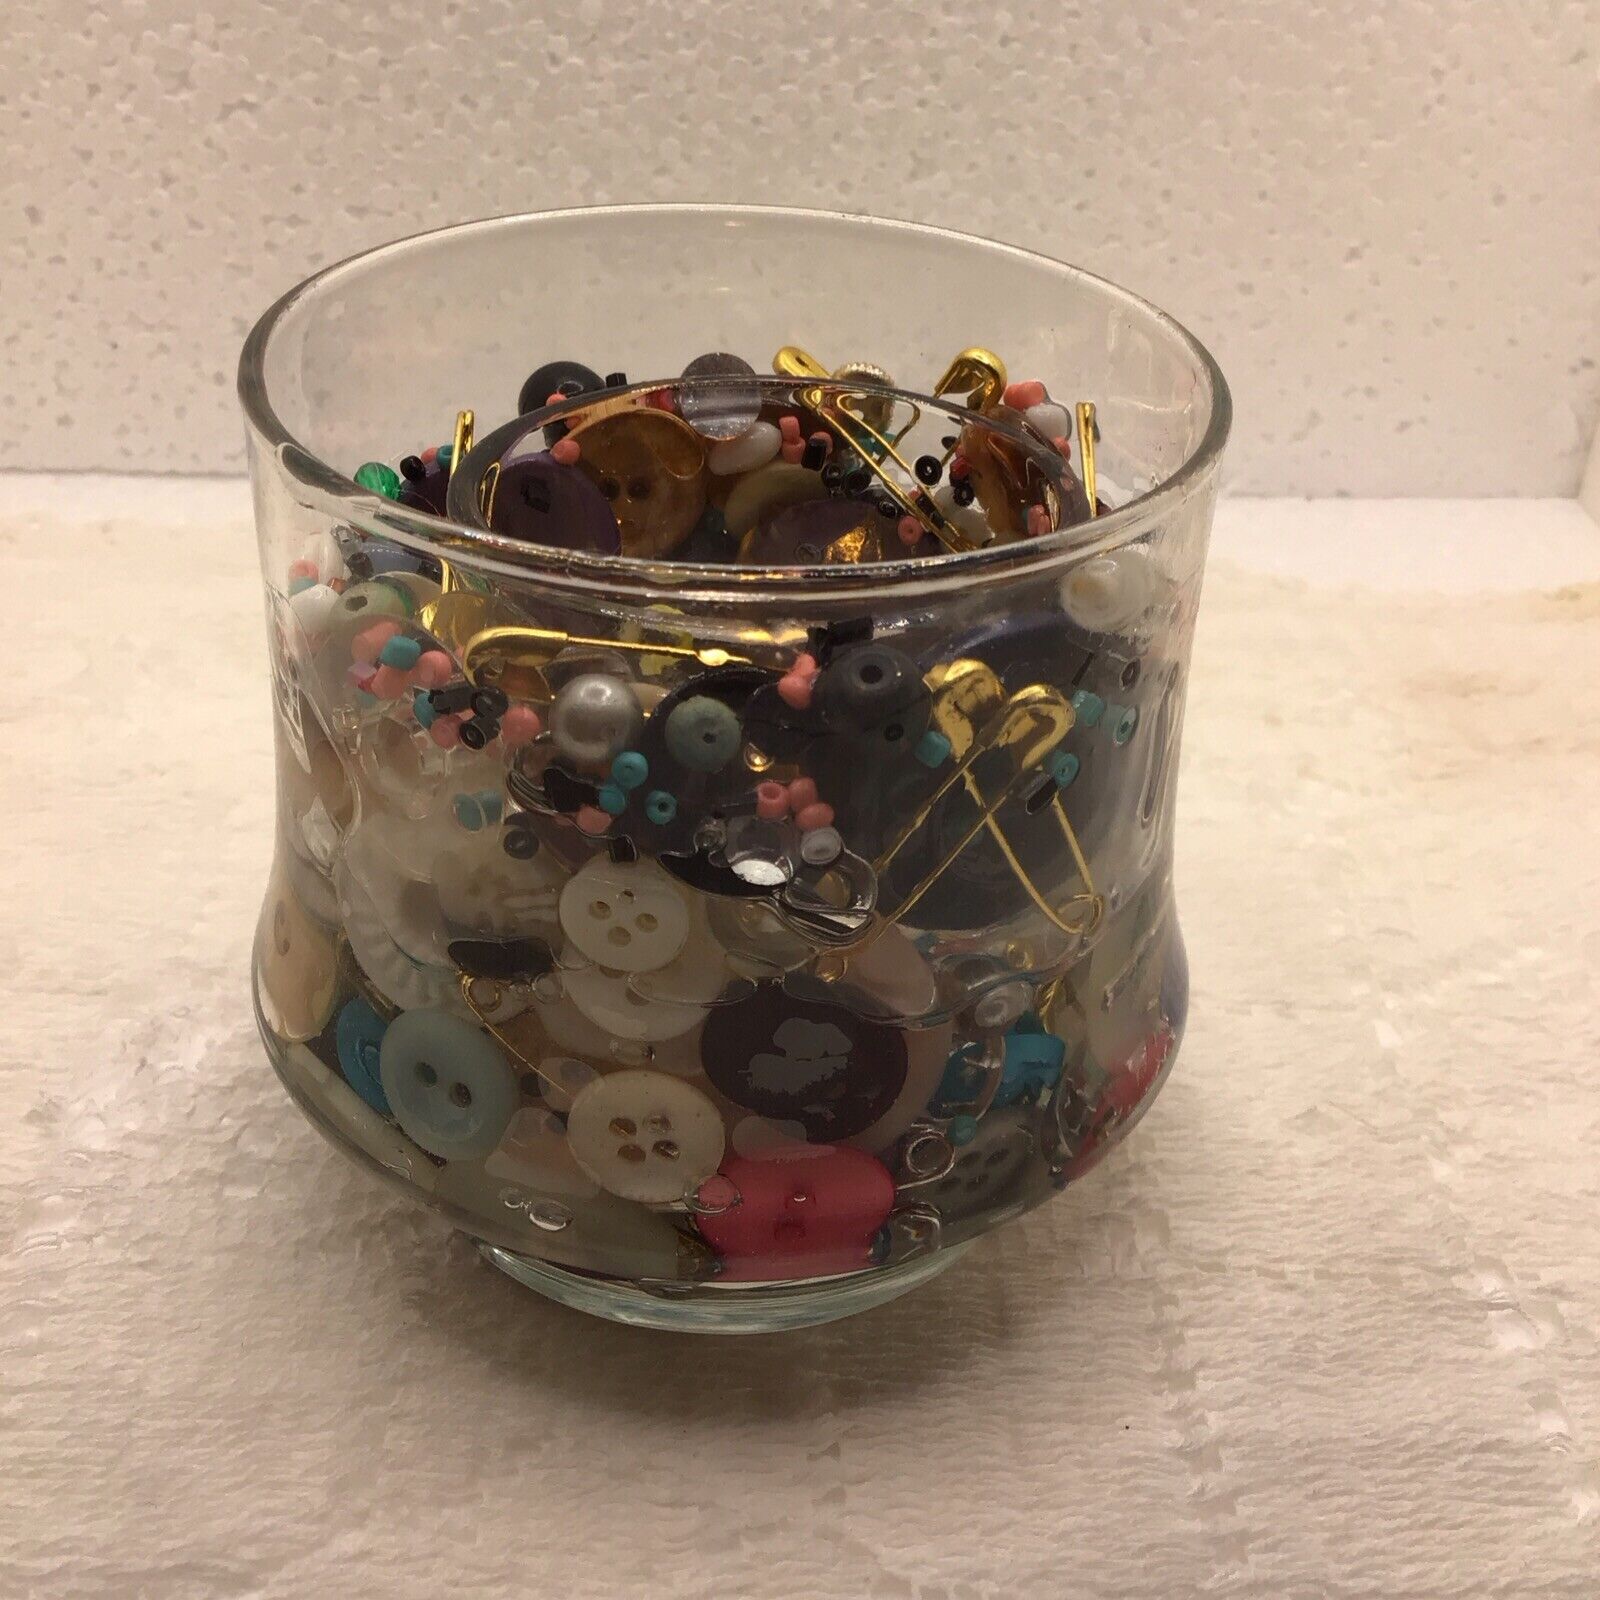 Glass Tea Light Holder, Buttons & Sewing Items Embedded in Resin, Unique Art